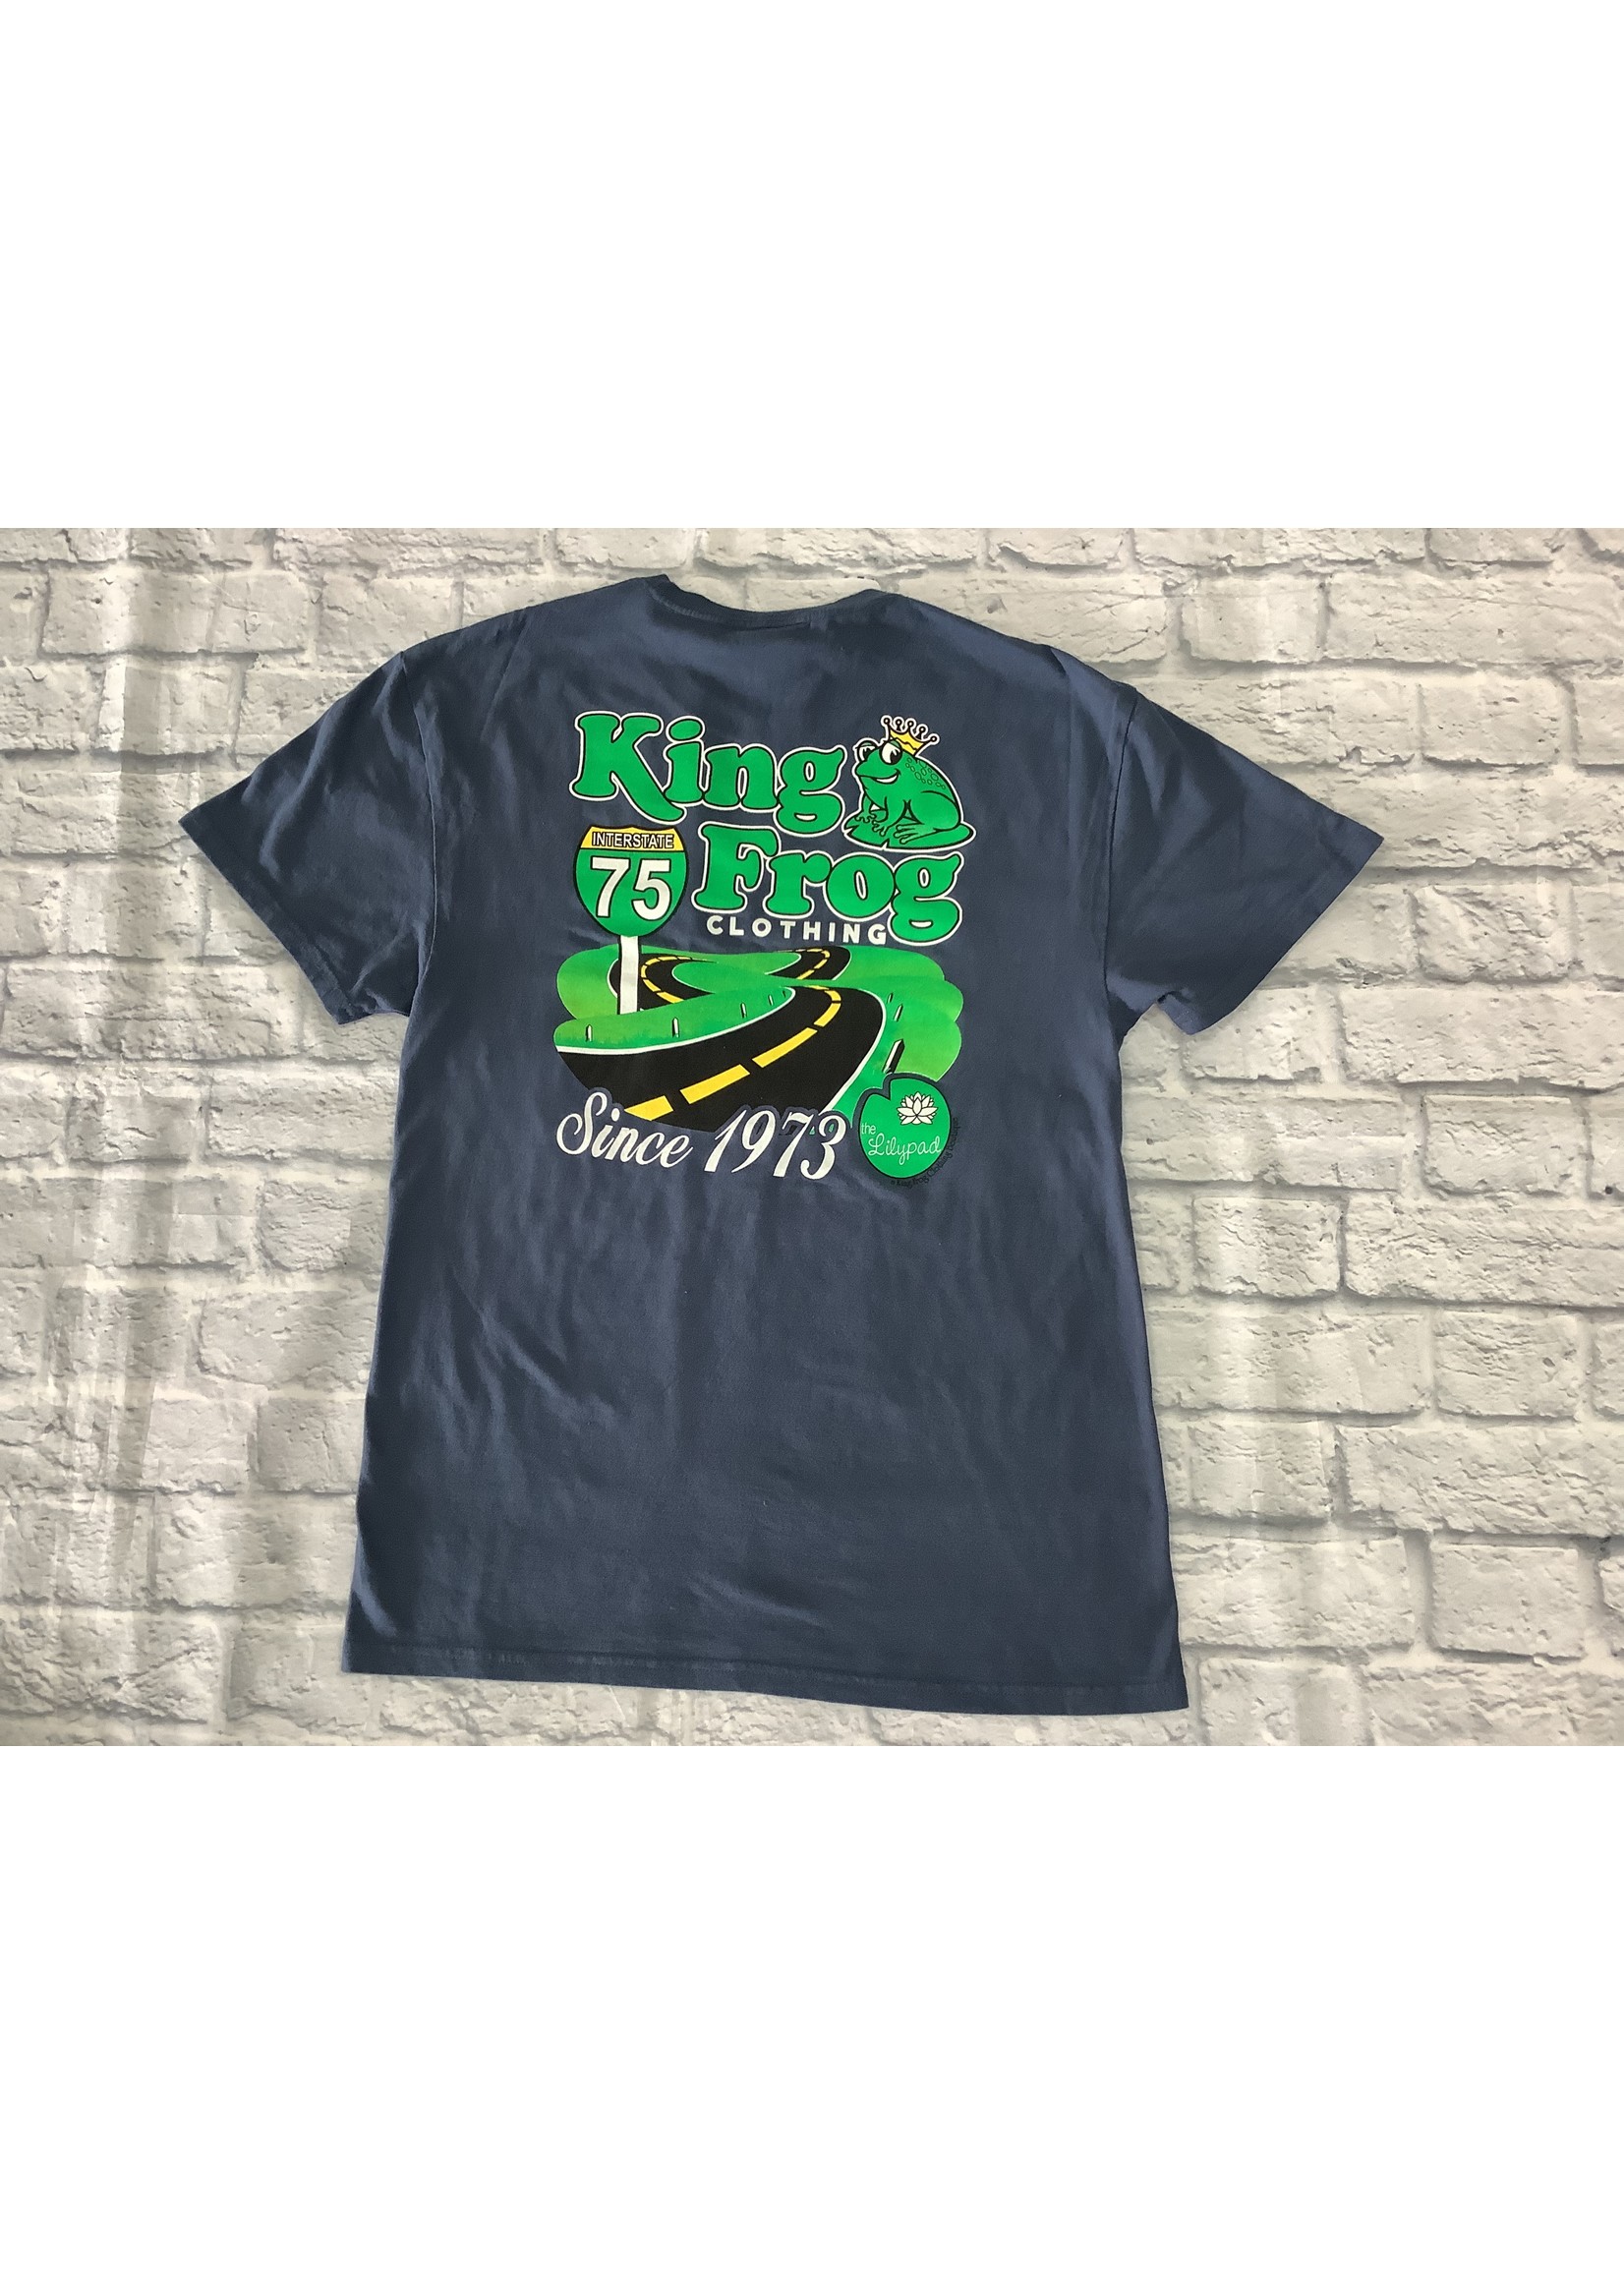 King Frog Clothing Youth King Frog and Lilypad T-shirt